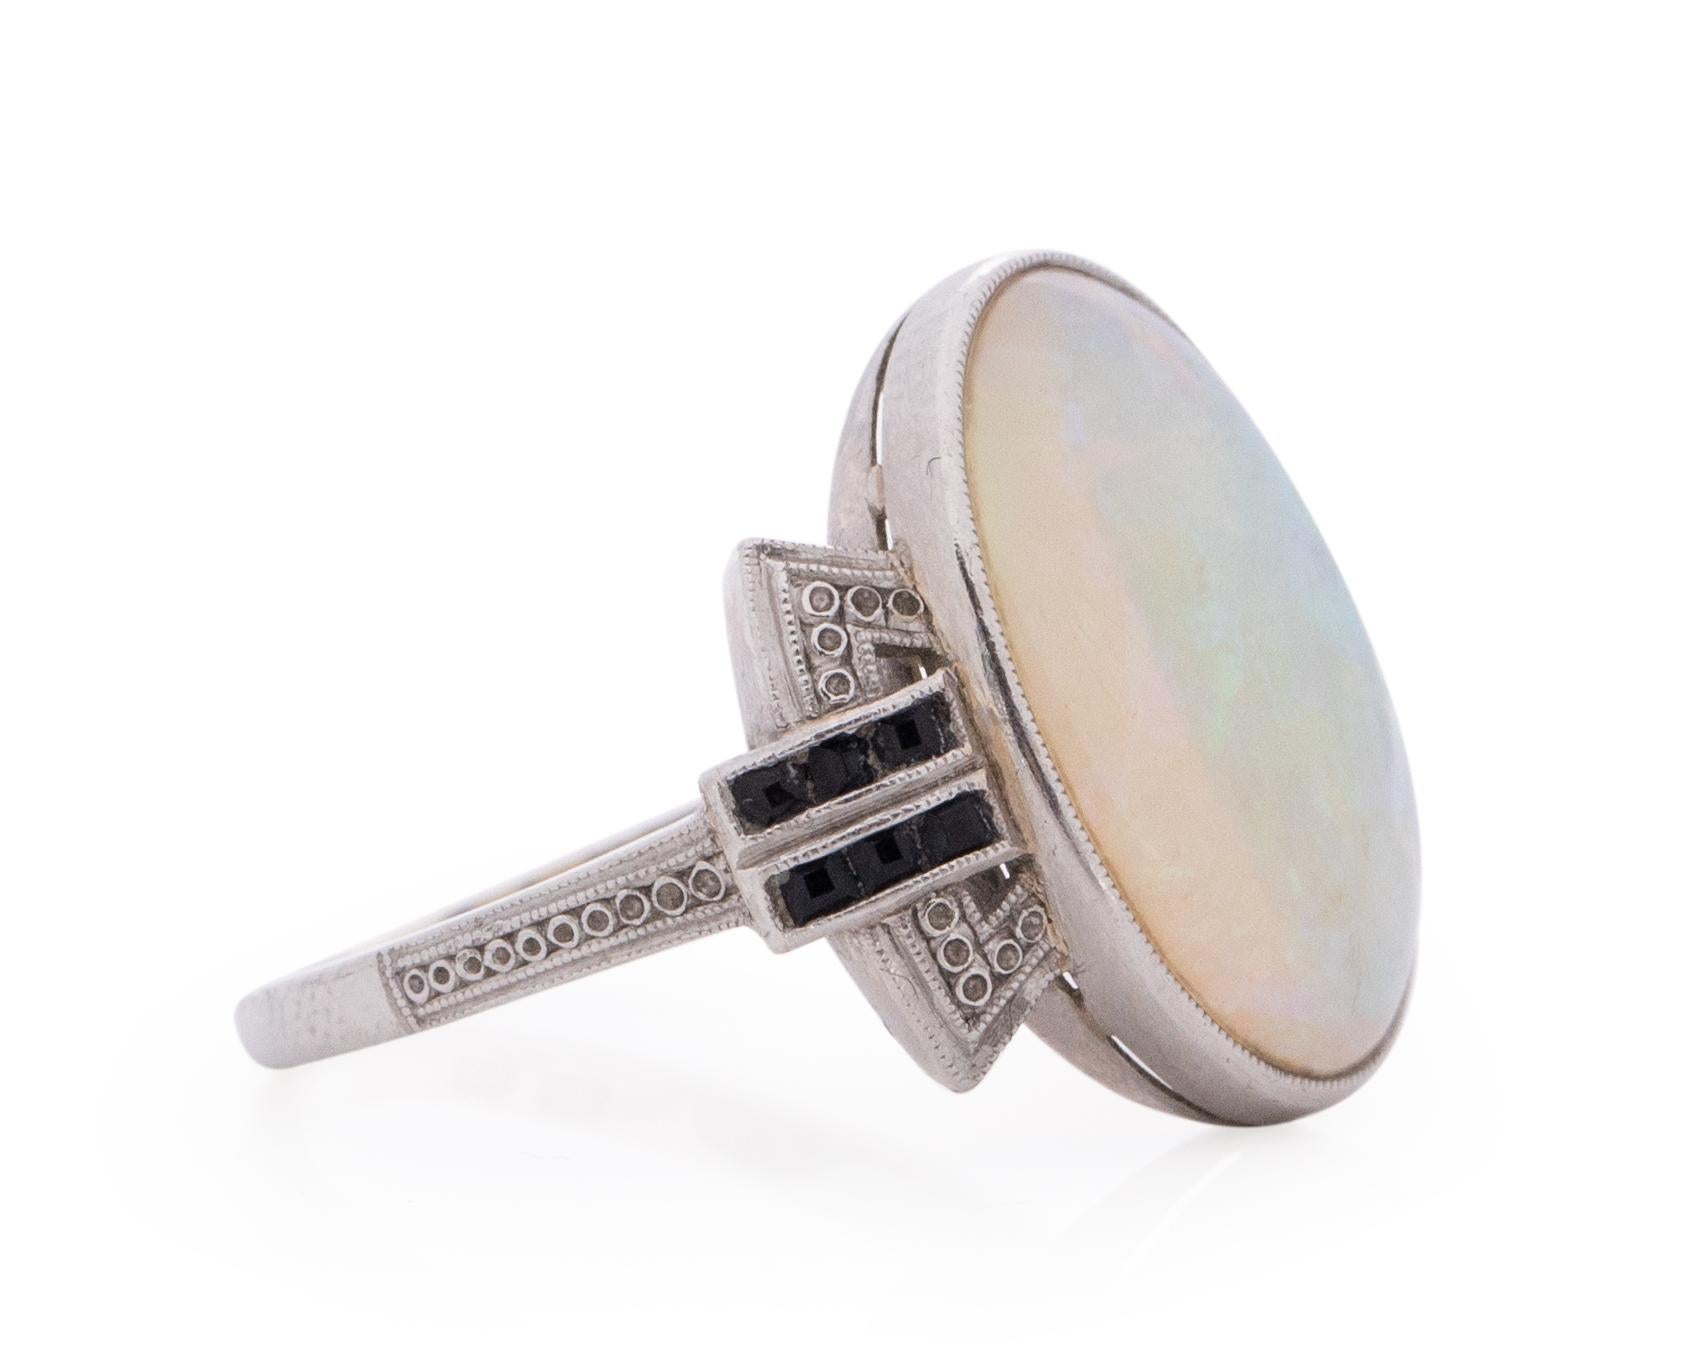 Item Details: 
Ring Size: 5
Metal Type: Platinum [Hallmarked, and Tested]
Weight: 2.8 grams

Center Opal Details:
Type: Opal
Weight: 3.50 Carat
Cut: Oval Cabachon

Side Stone Details:
Type: Onyx
Weight: .15 Carat Total Weight
Cut: Antique French